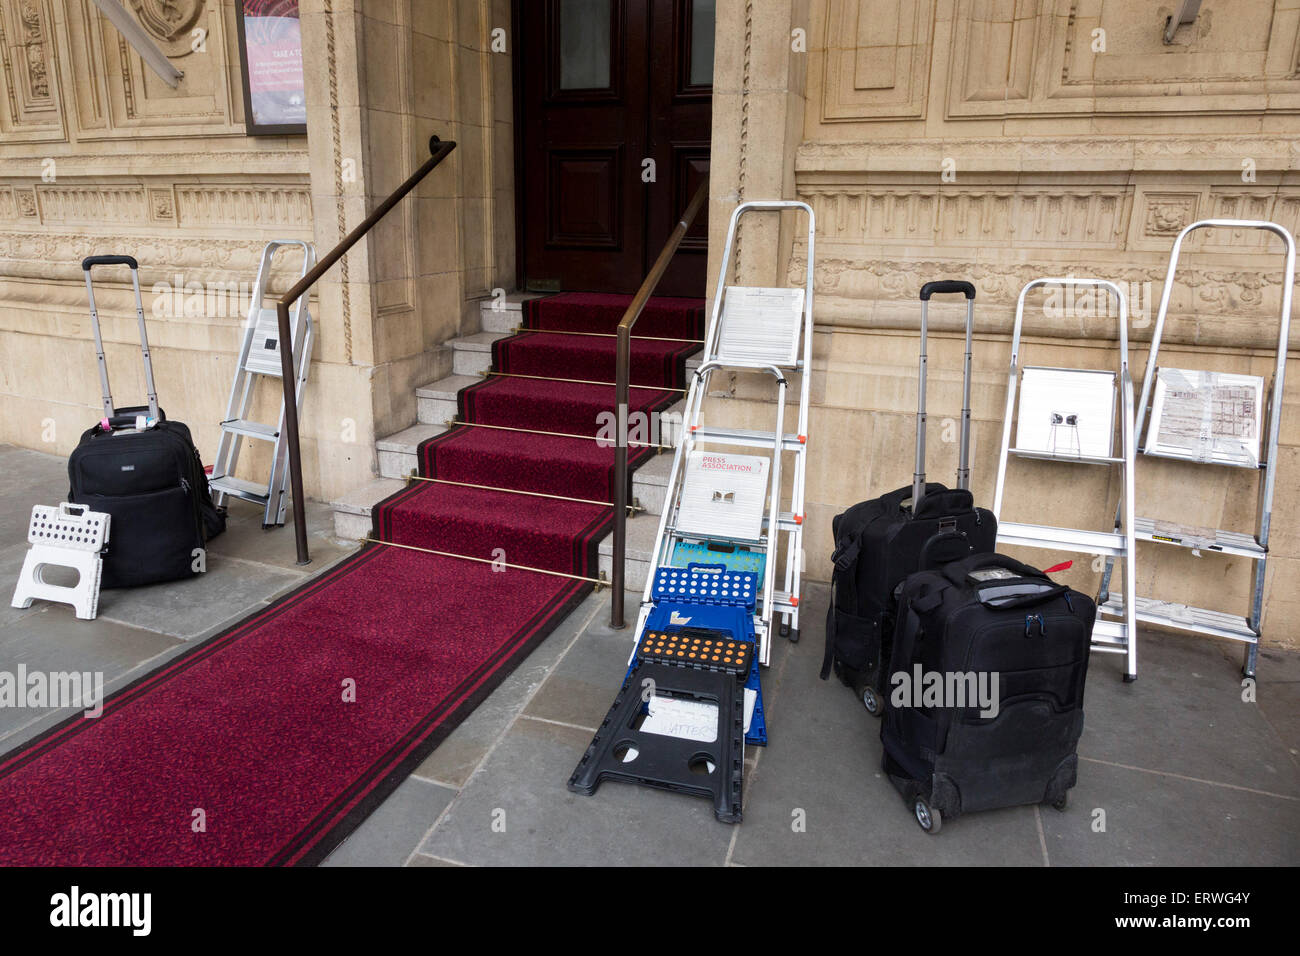 Press photographers' ladders, folding stools and bags ahead of a red carpet celebrity arrival, Royal Albert Hall, London, England, UK Stock Photo